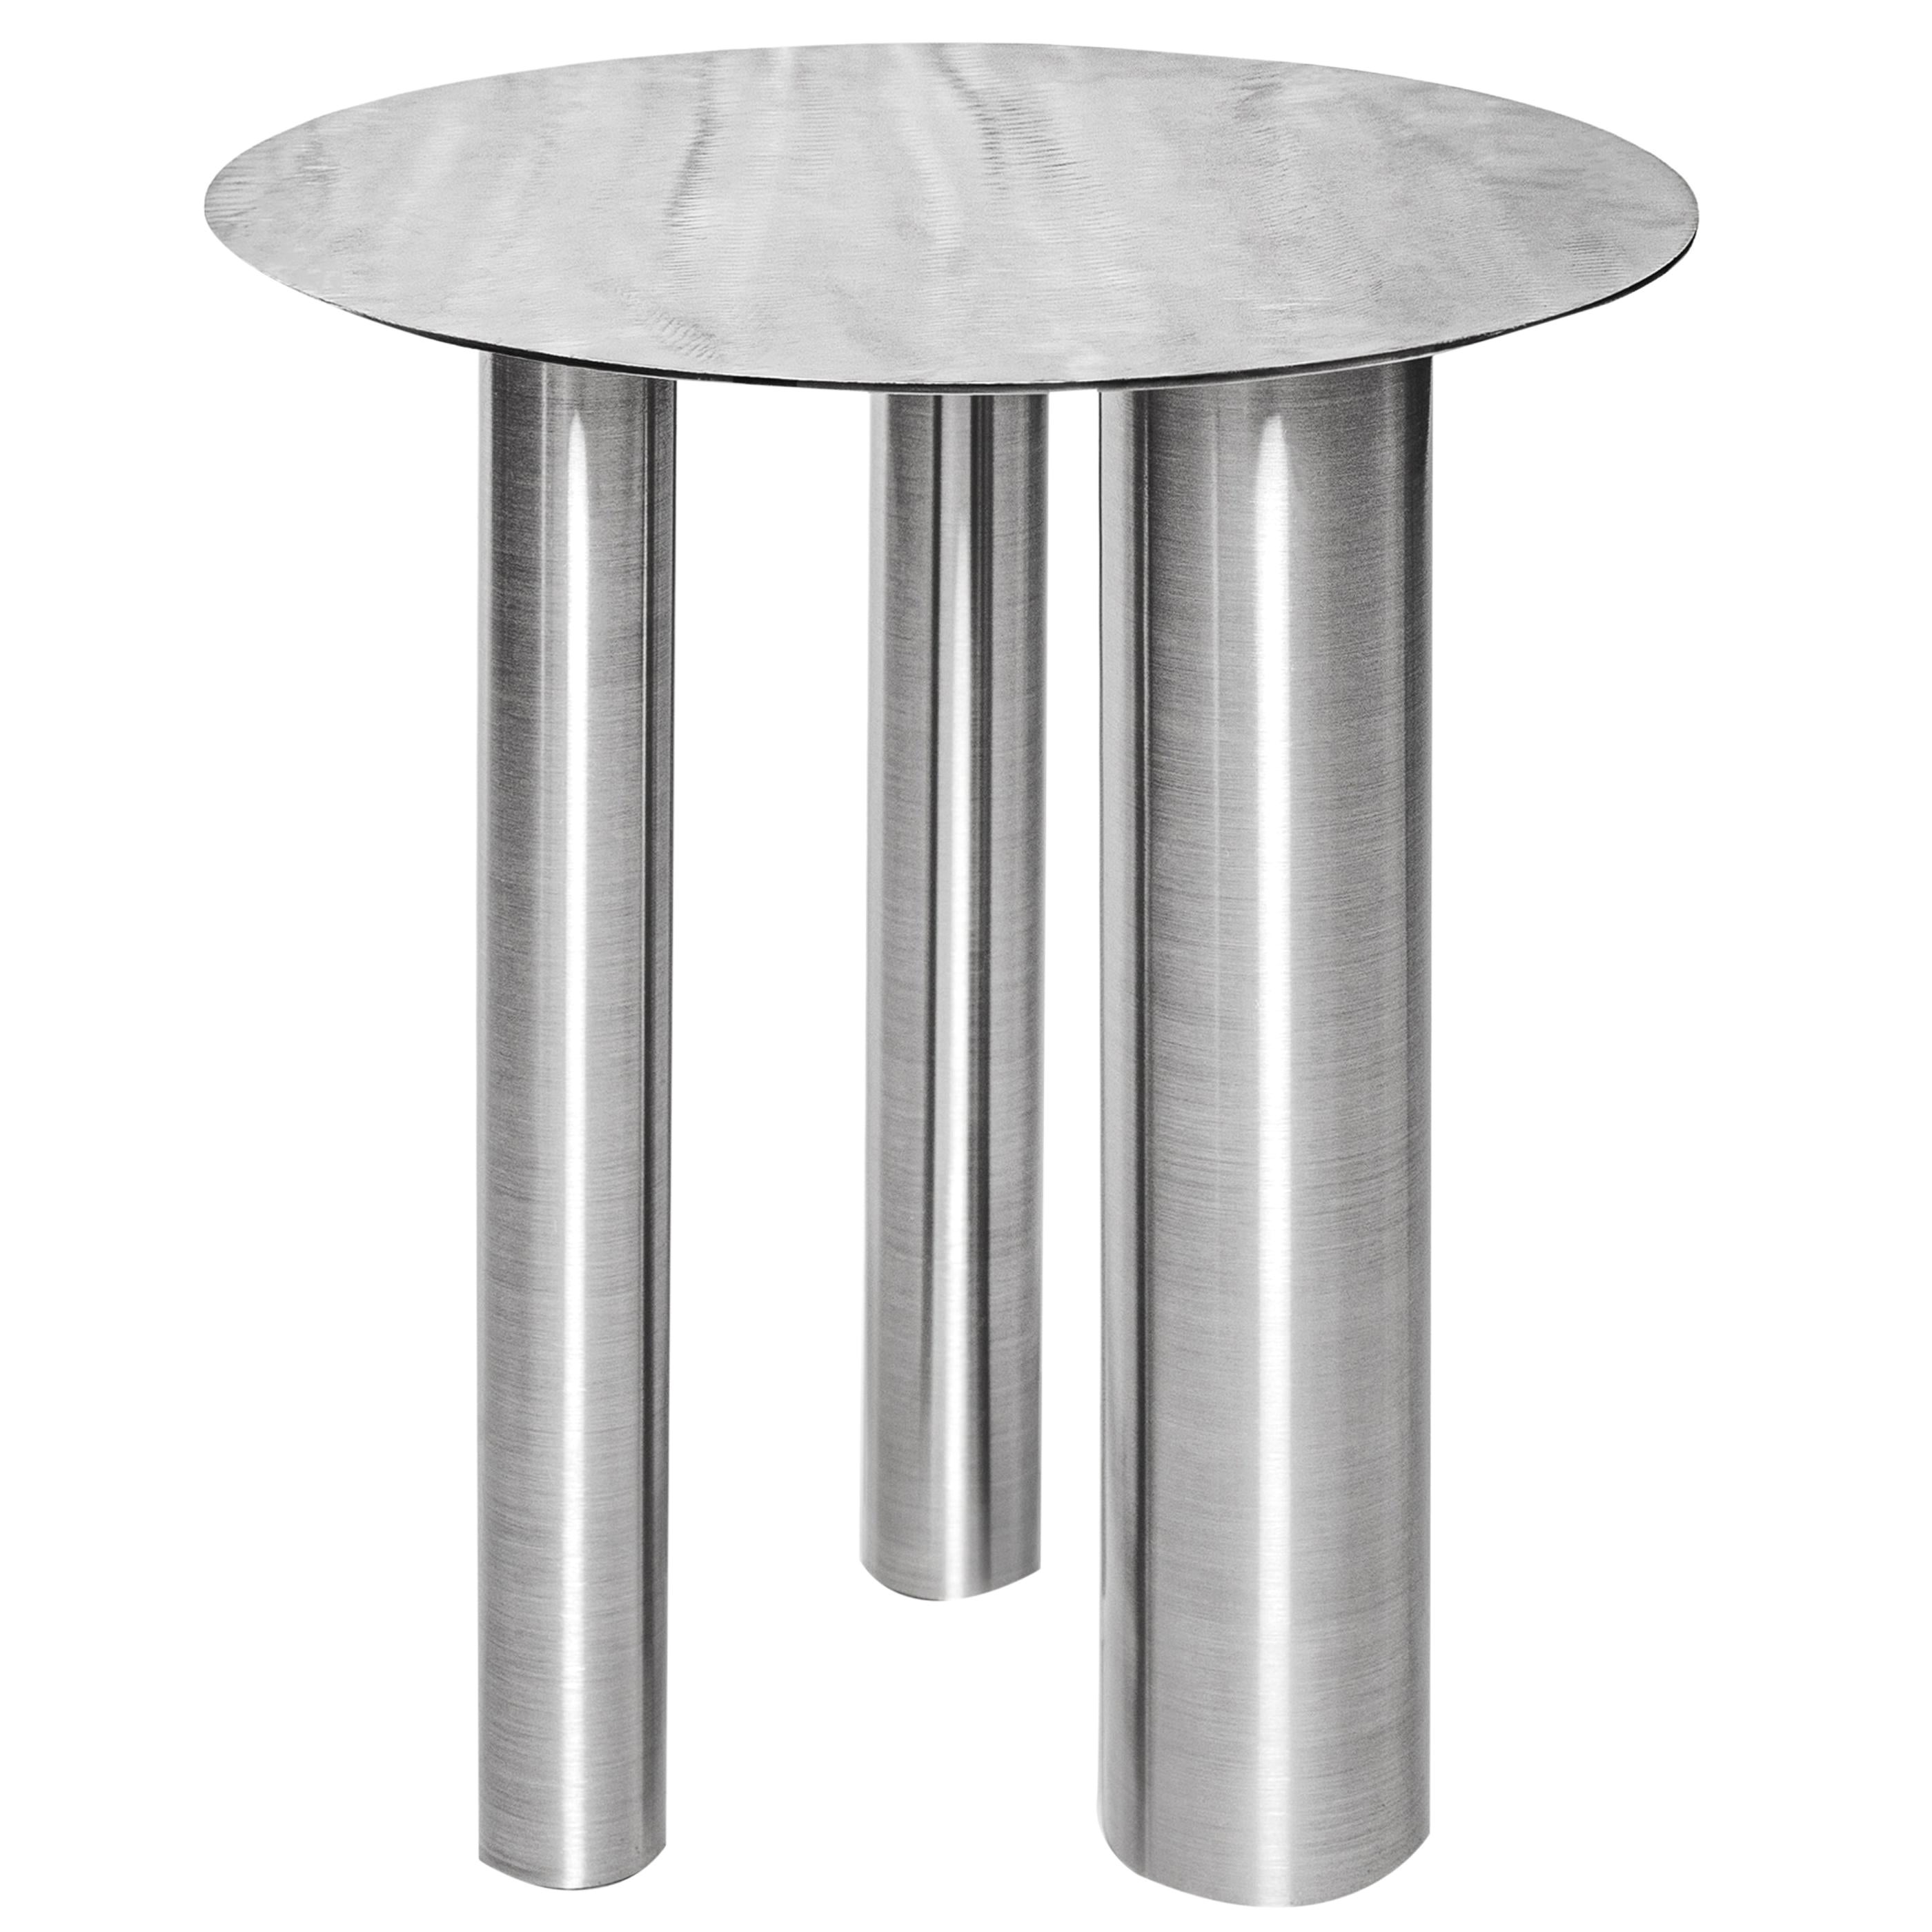 Stainless Steel Brandt High Coffee Table by Noom